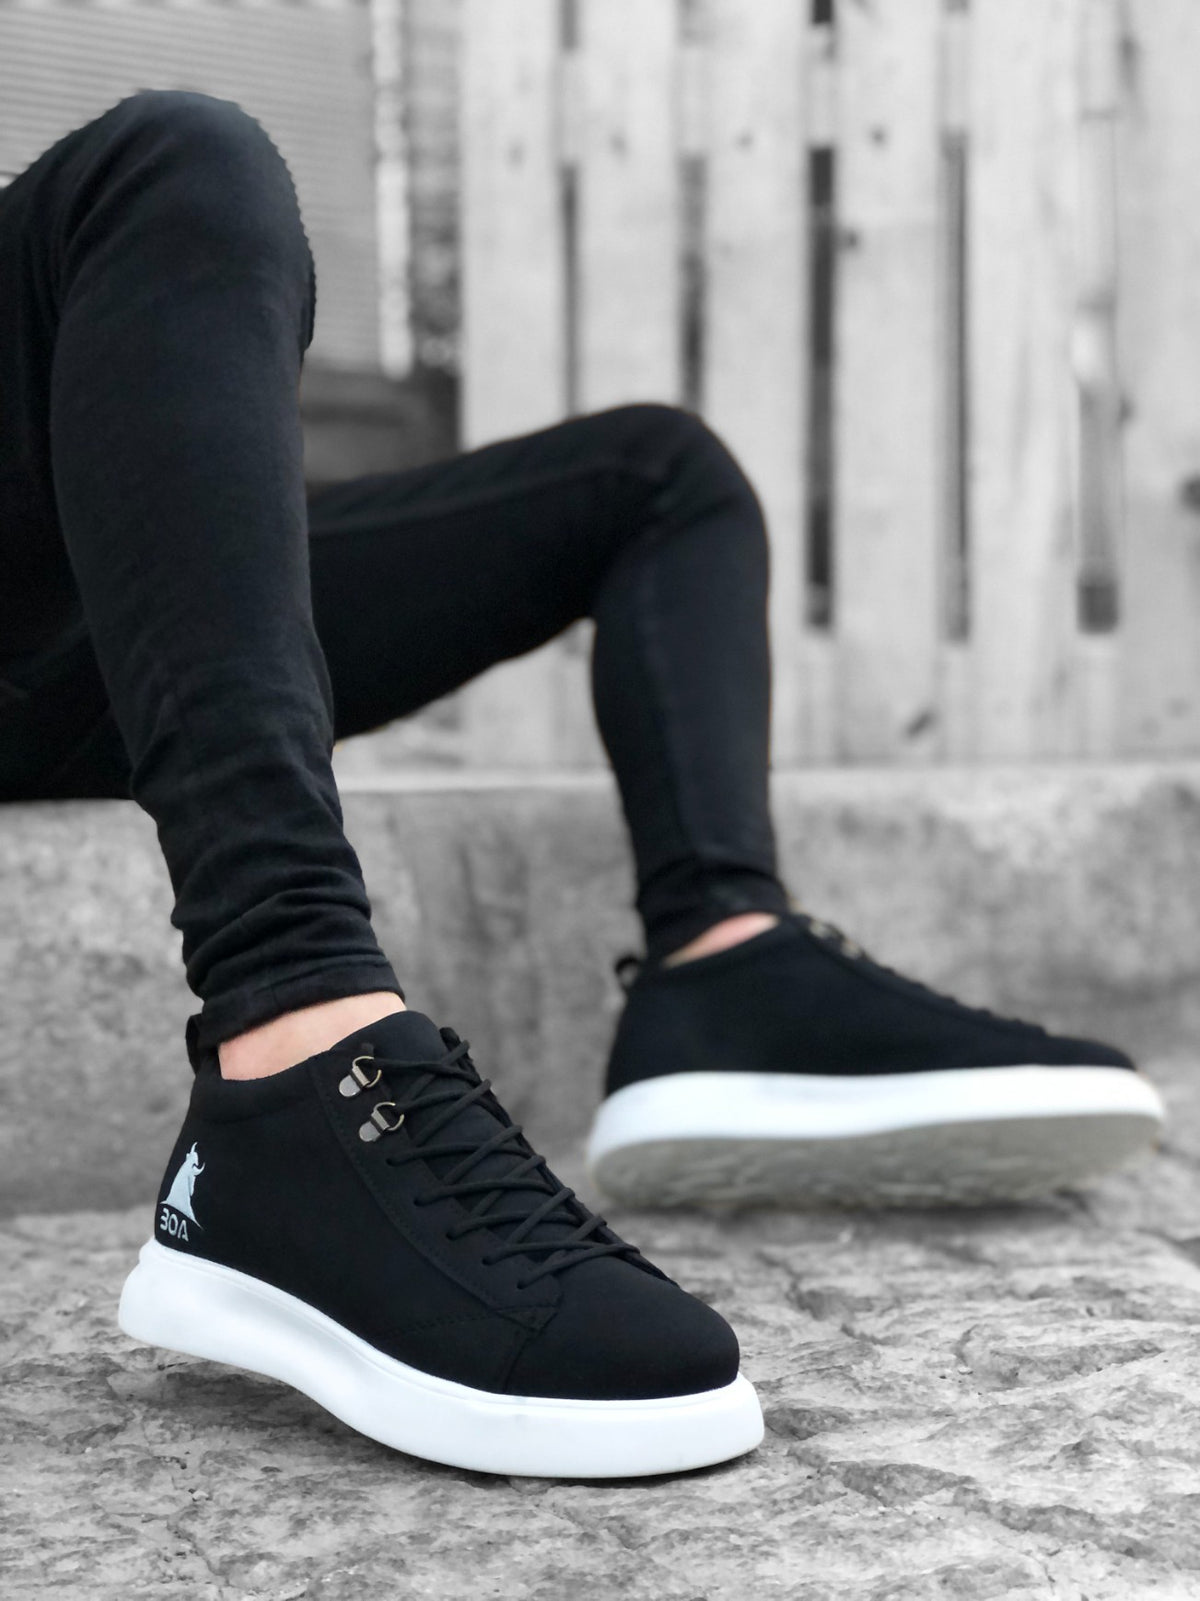 BA0220 Lace-up Men's High Sole Black White Sole Sports Shoes sneakers - STREETMODE ™